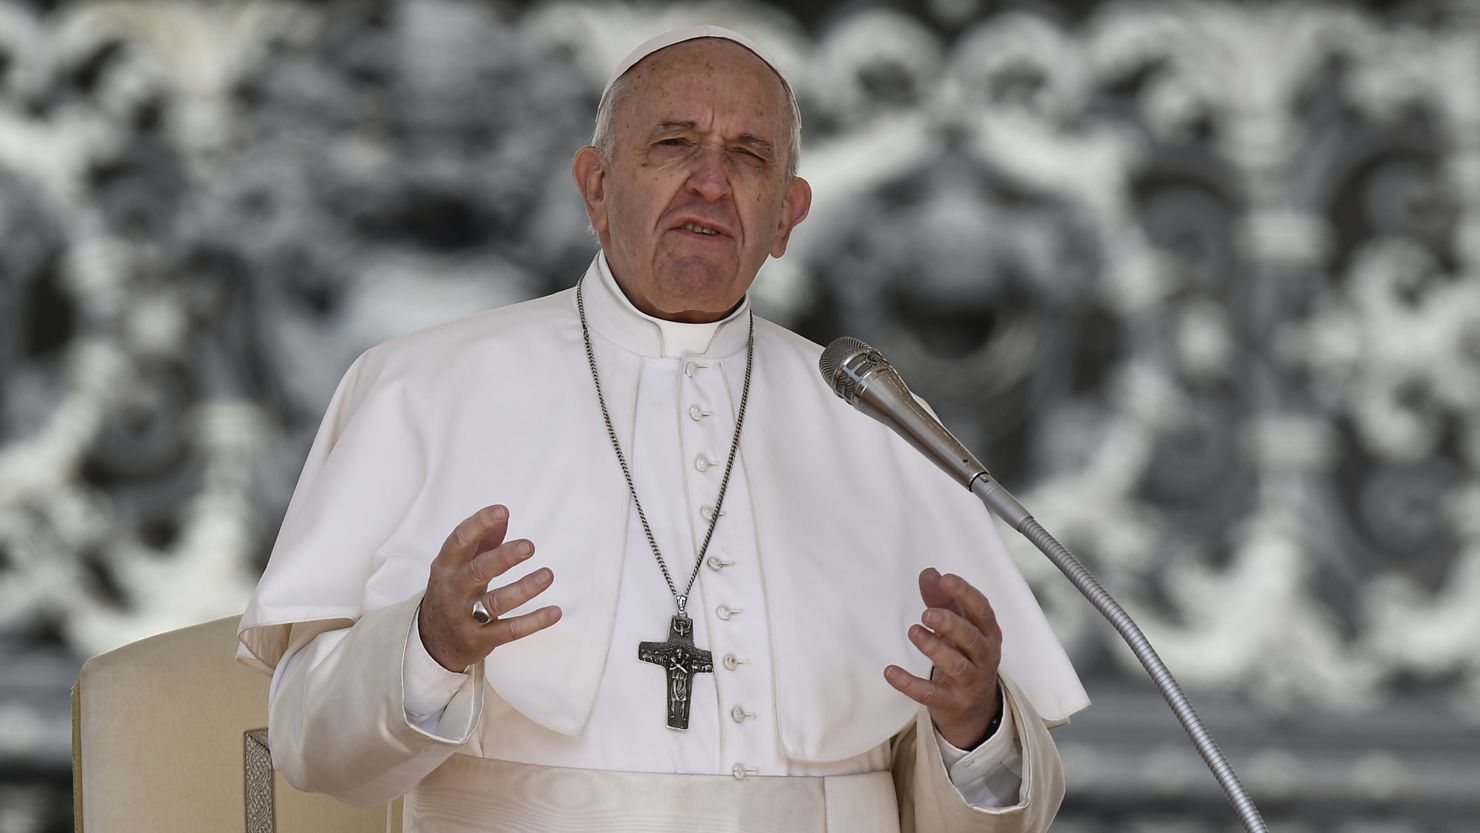 Pope Francis said: "Never, ever eliminate a human life or hire a hitman to solve a problem."